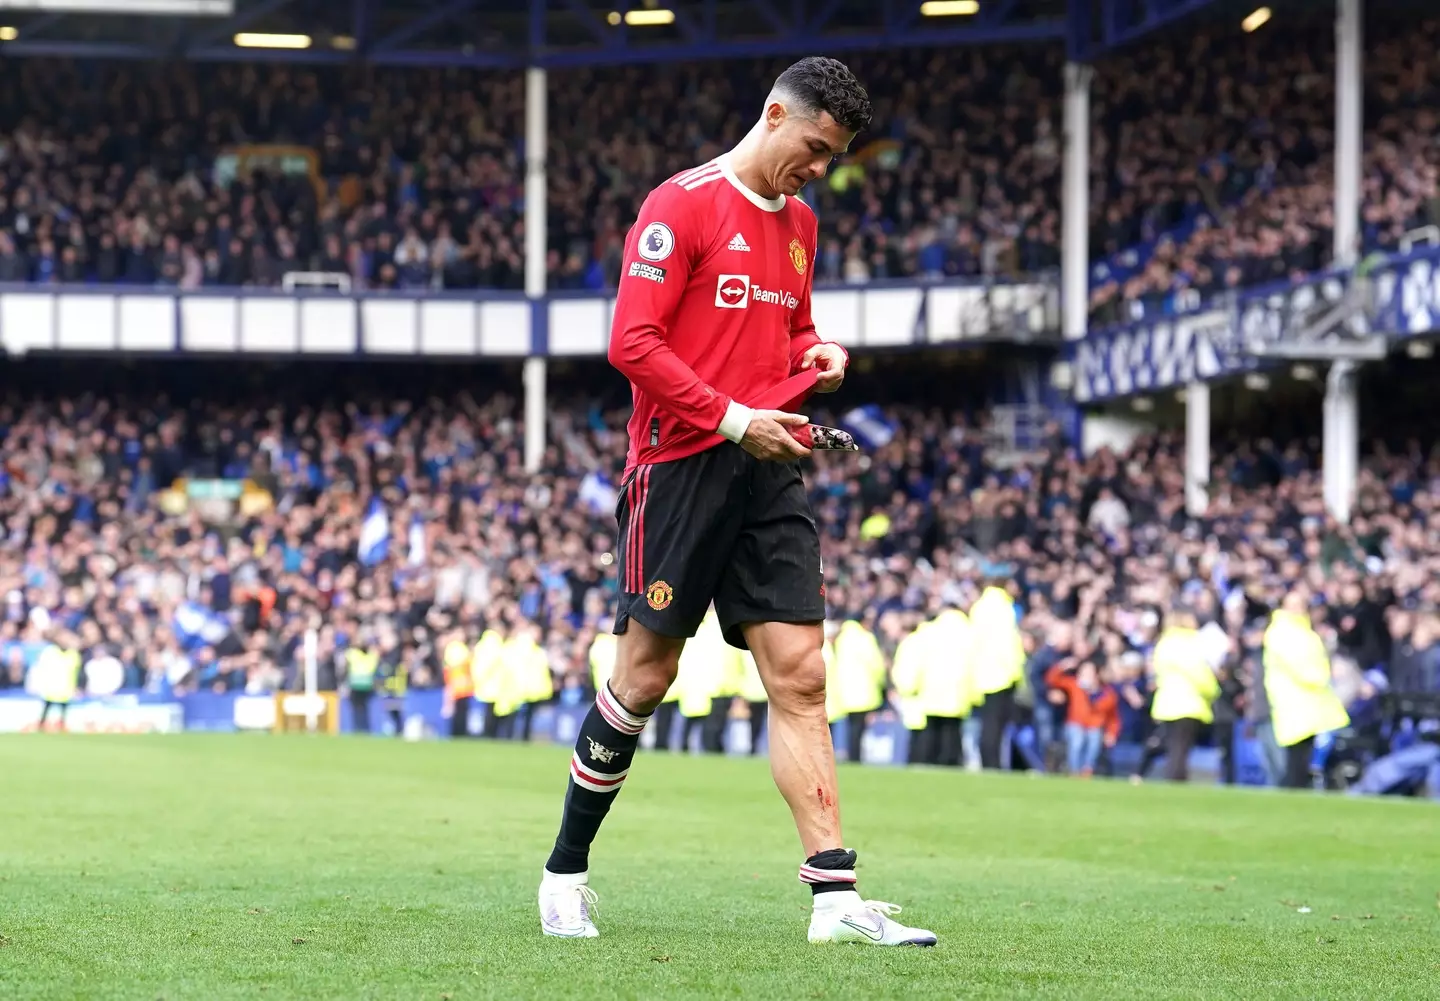 Ronaldo was not happy after the loss to Everton. Image: Alamy